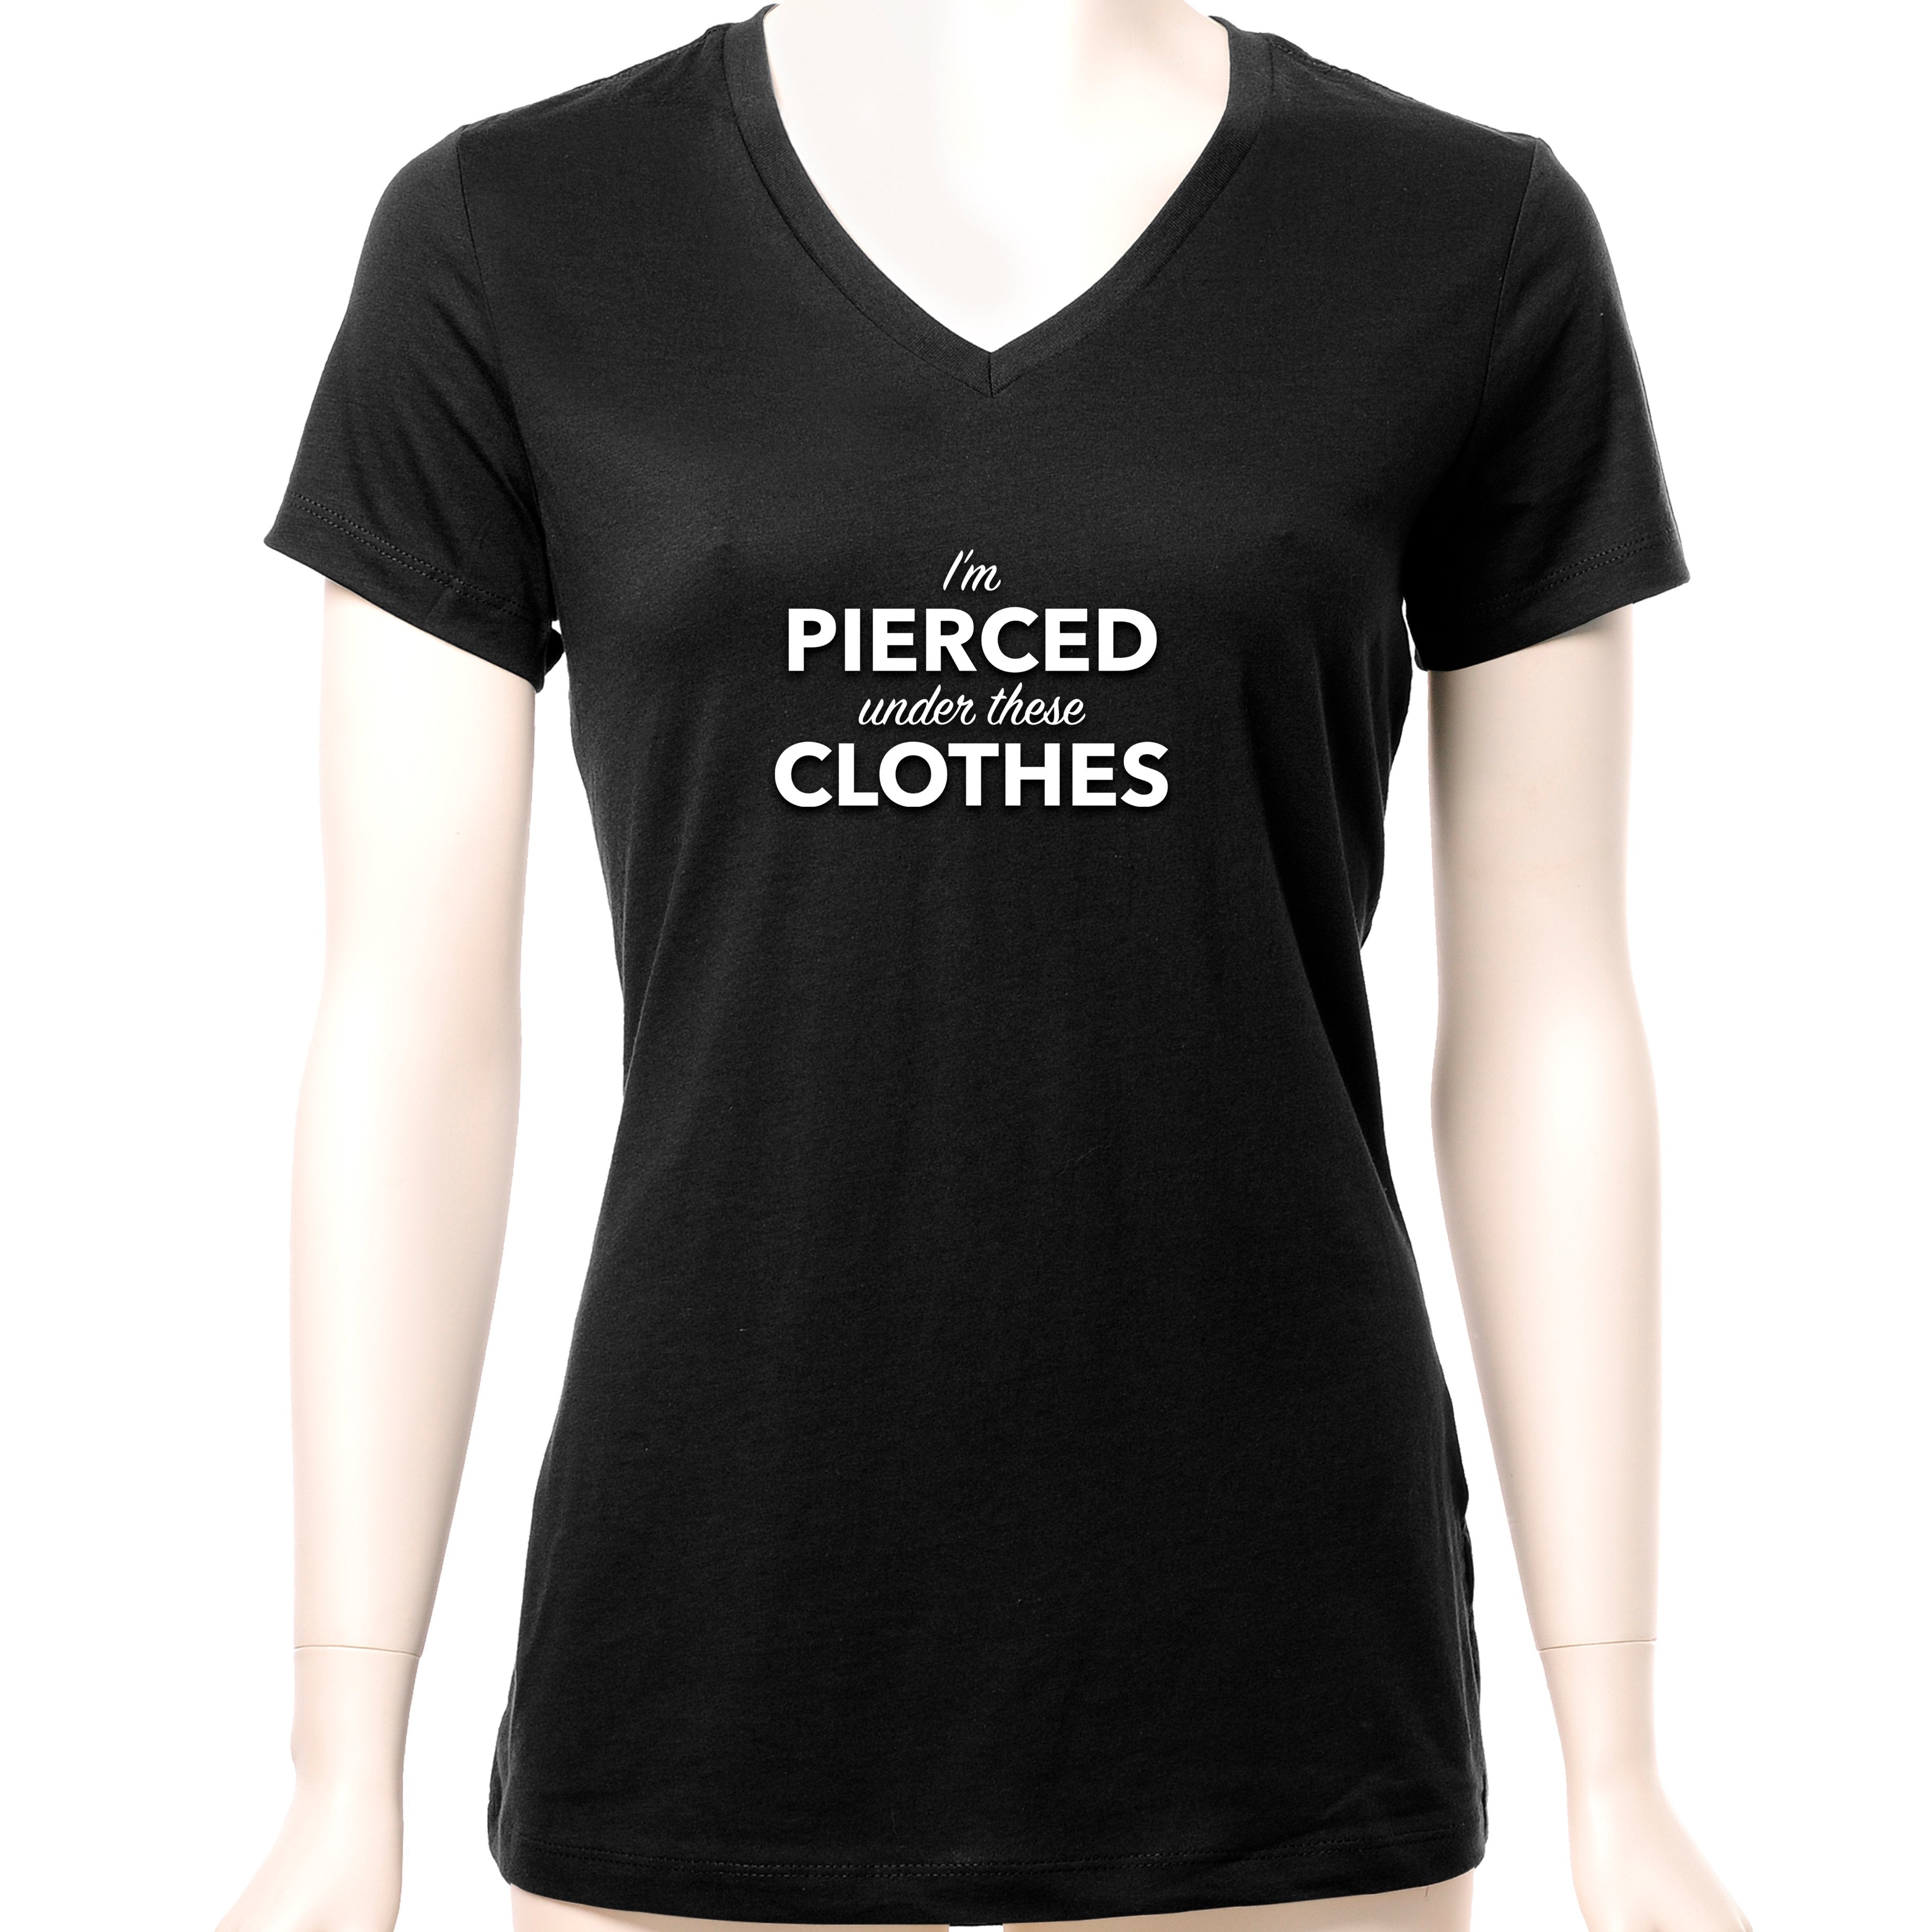 I'm Pierced Under These Clothes Black Tapered V-Neck Tee Shirt